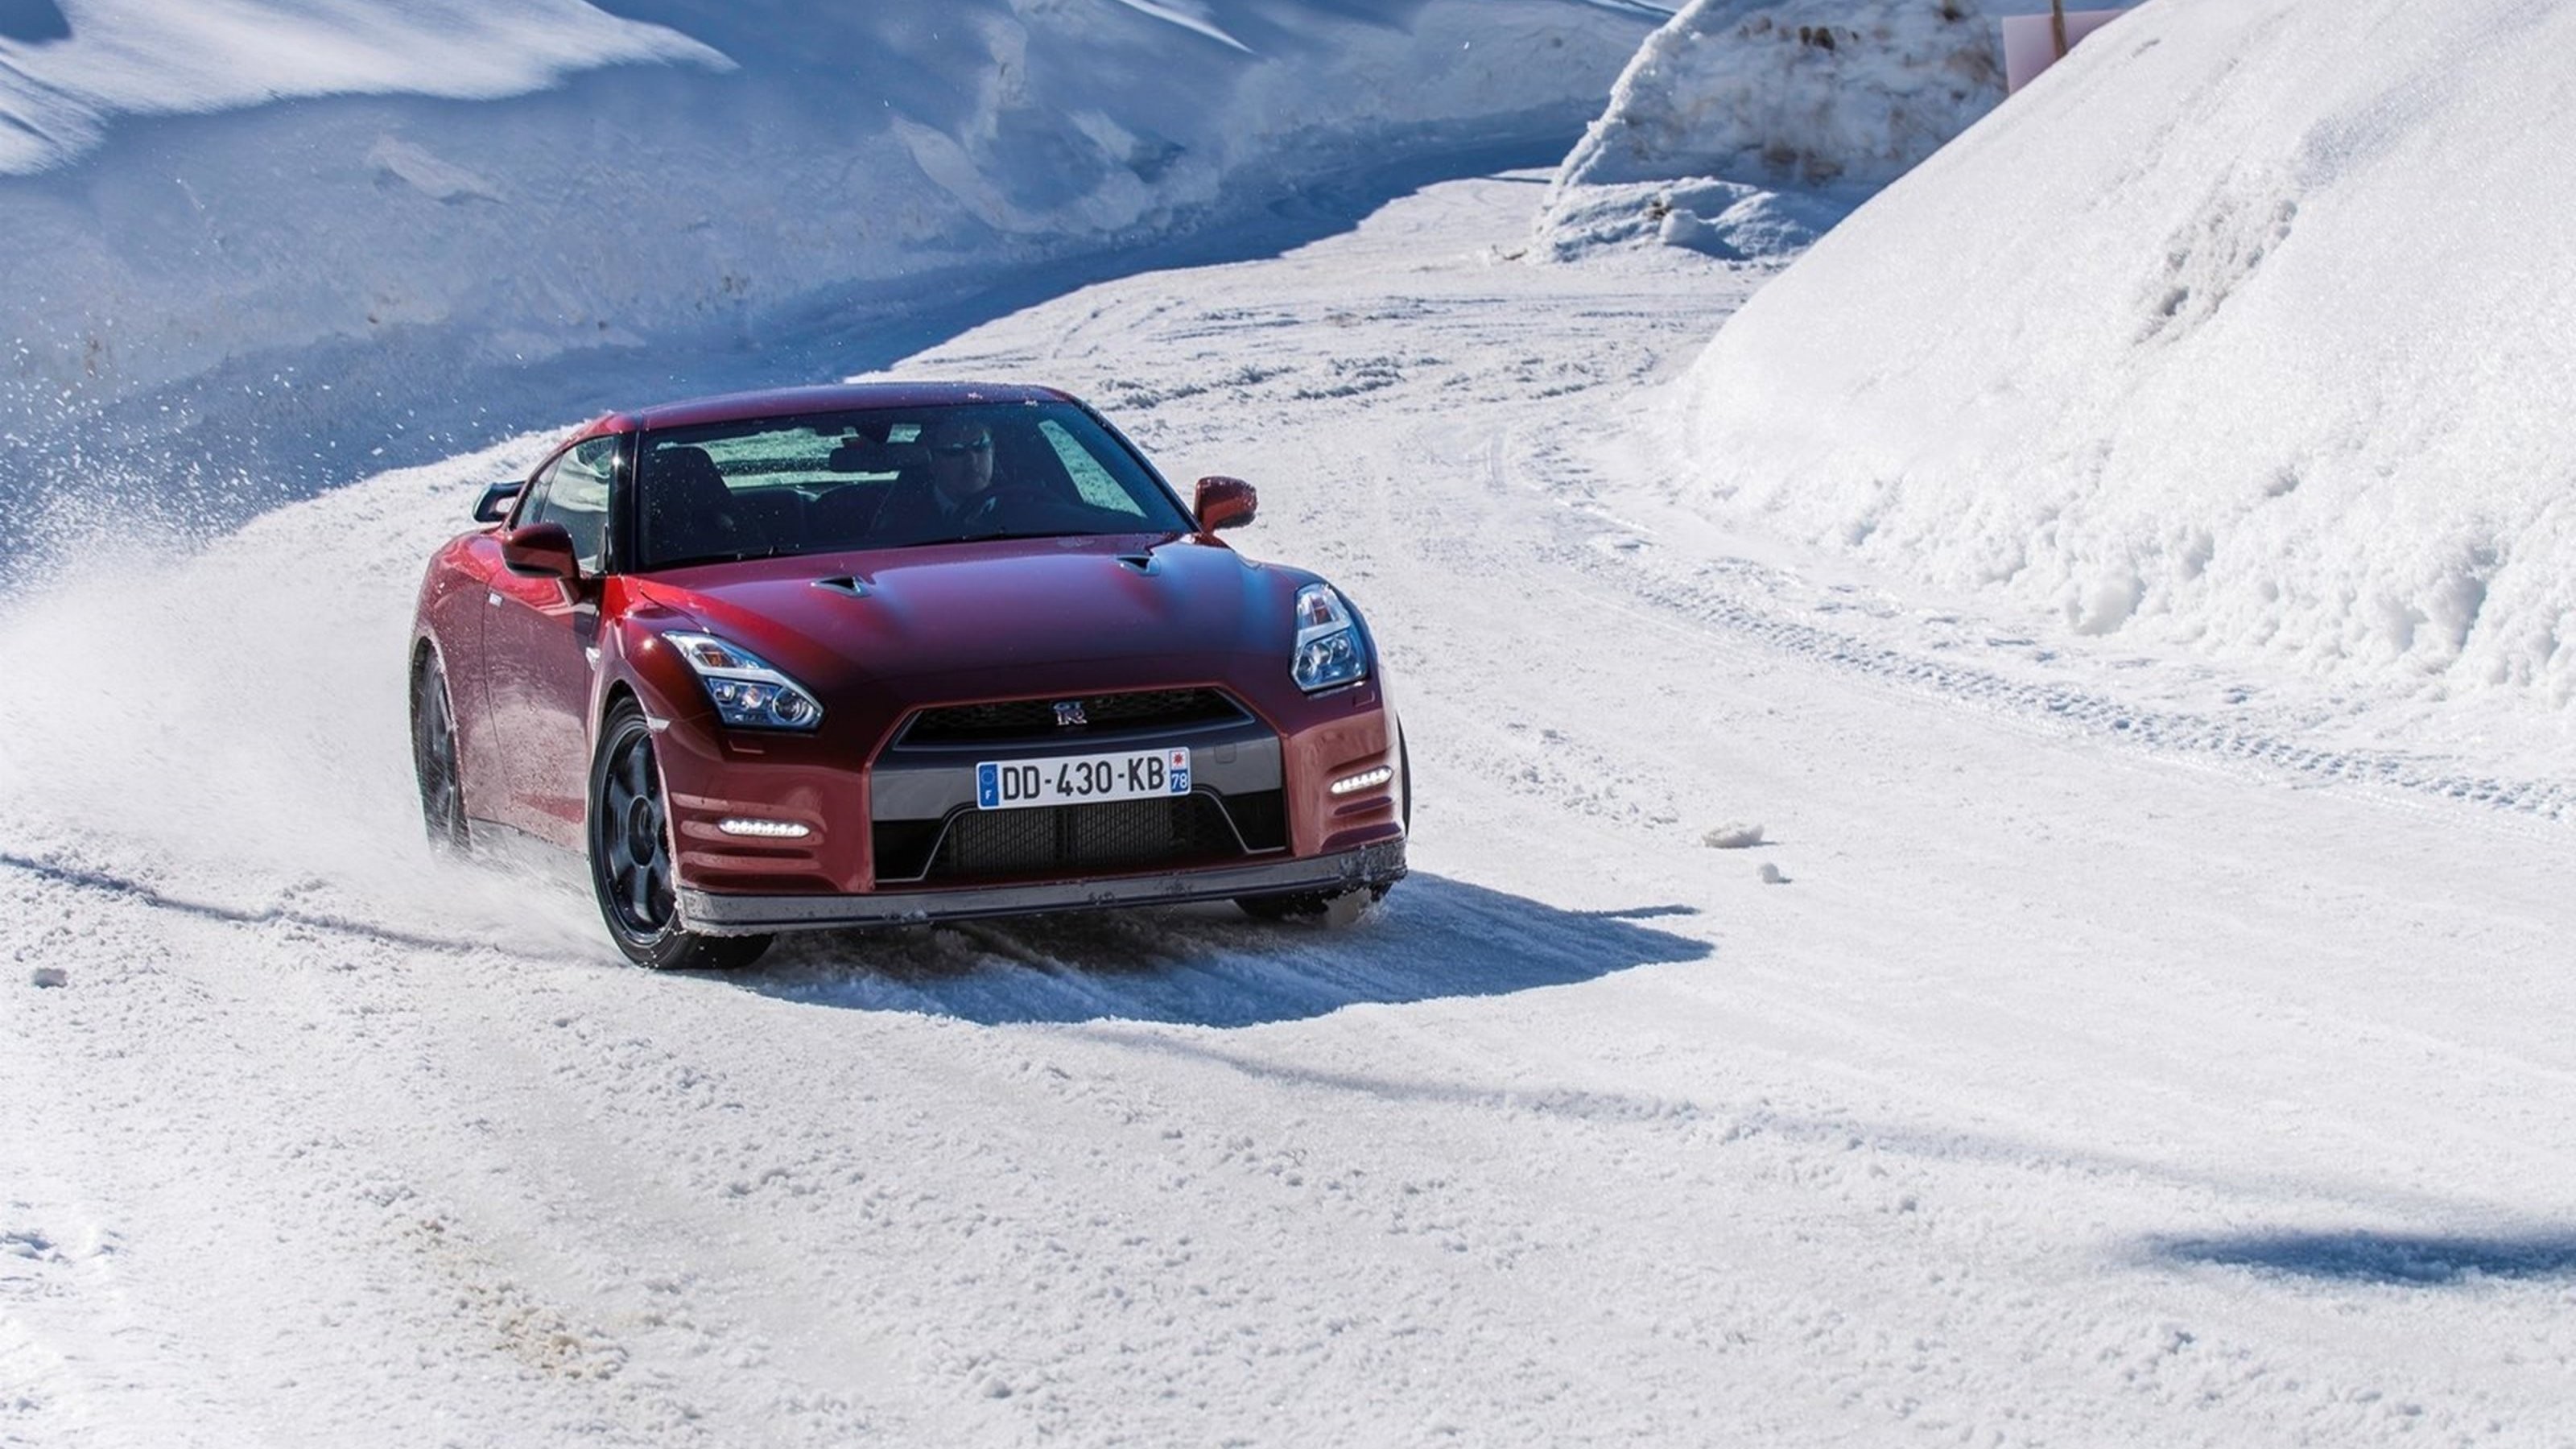 General 3200x1800 Nissan Nissan GT-R winter car vehicle red cars numbers outdoors